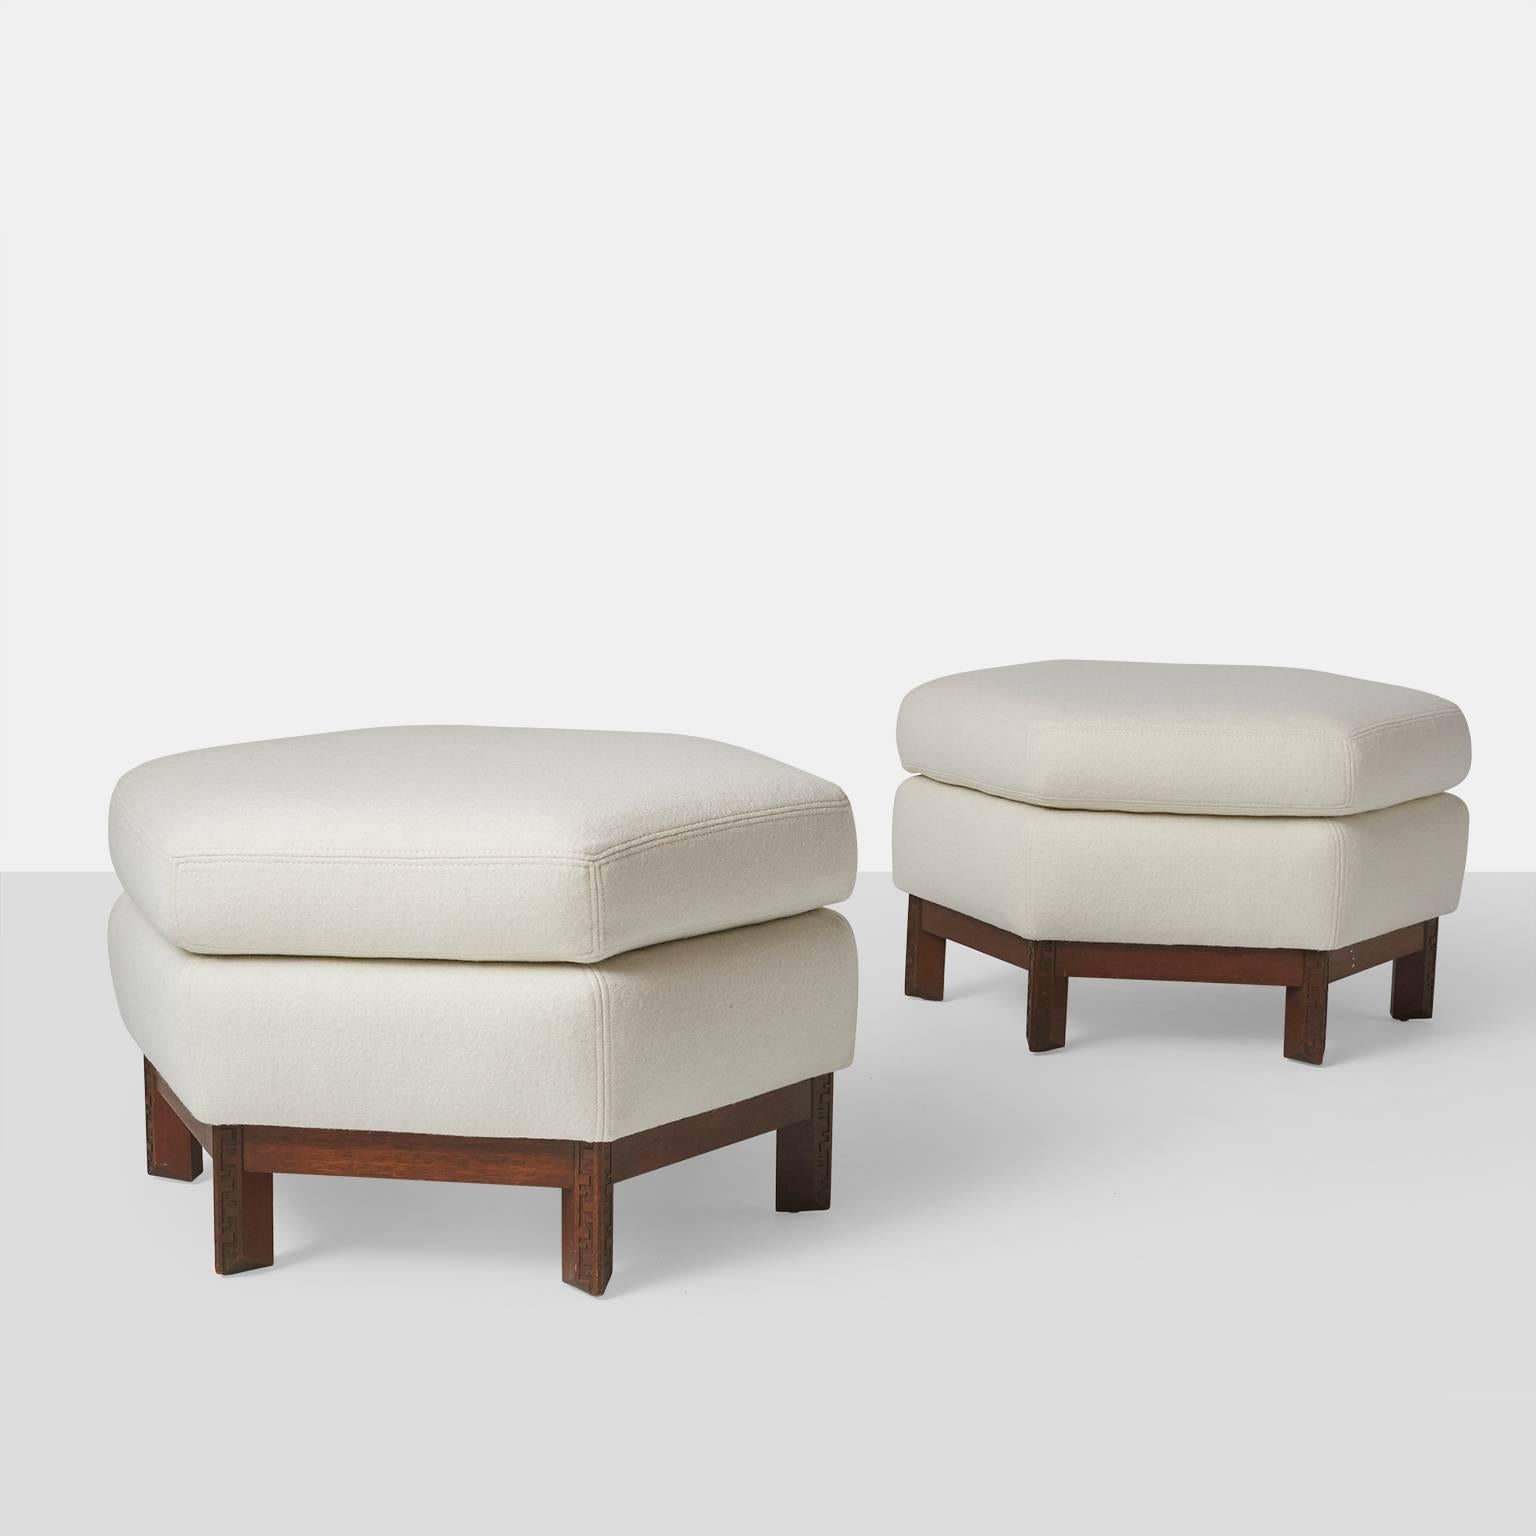 A pair of Frank Lloyd Wright hexagonal ottomans, each having a semi attached seat cushion, and rising on geometric Taliesin style mahogany legs. Restored in a luxurious boiled wool fabric from Holland & Sherry. Manufactured by Henredon.

Ottomans